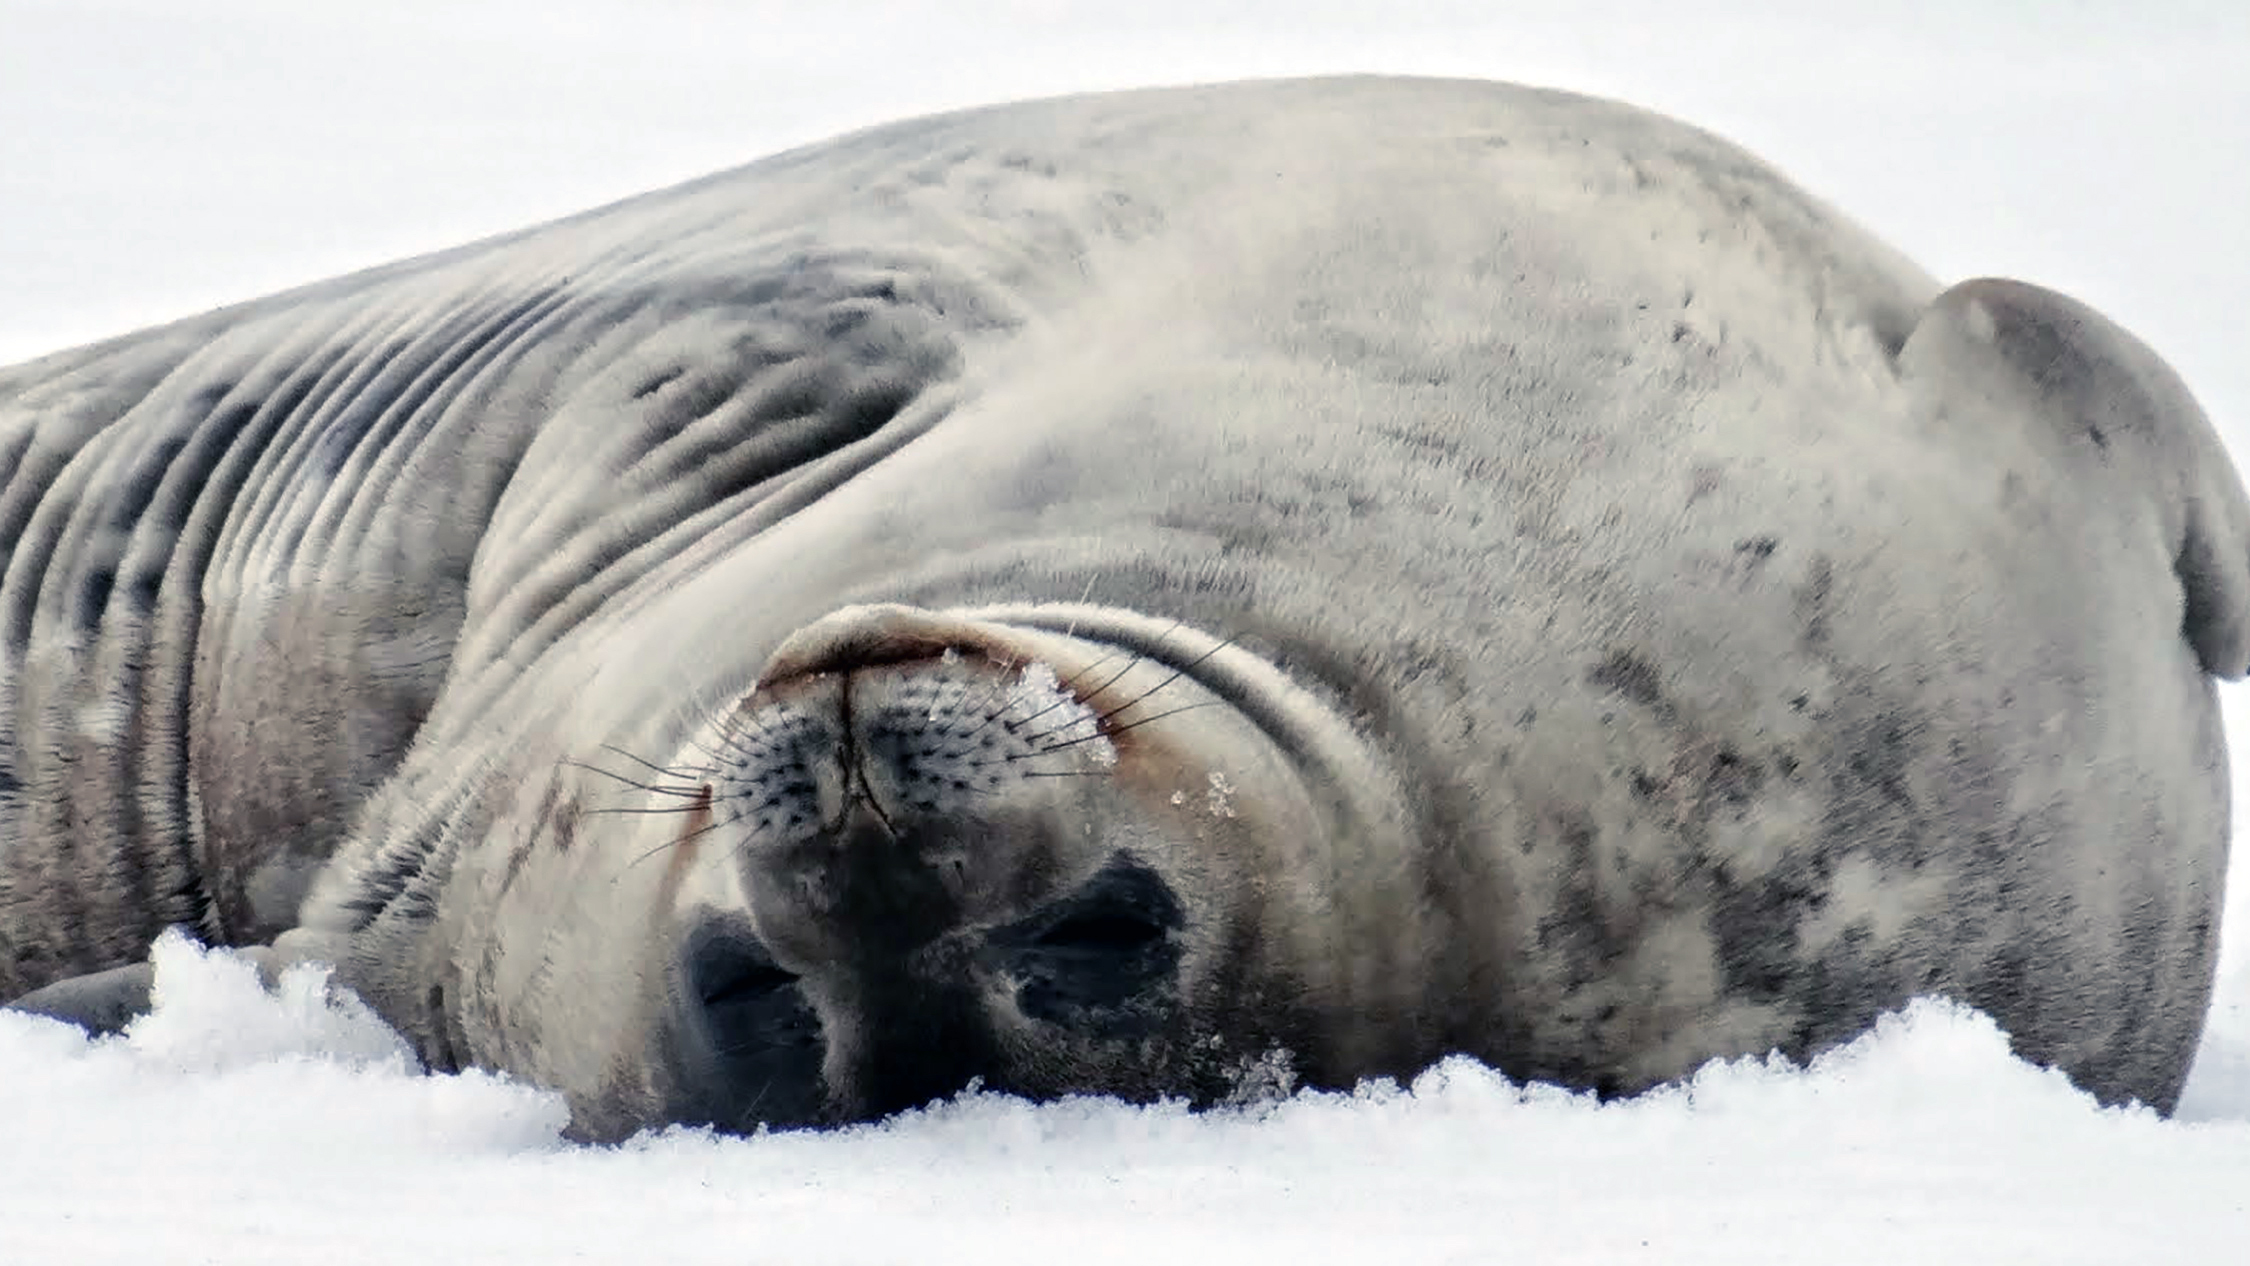 We encountered our first Weddell seals on the shore of Half Moon Island.  These masters of diving in the cold Southern Ocean waters were relaxing in the snow as we passed by them.